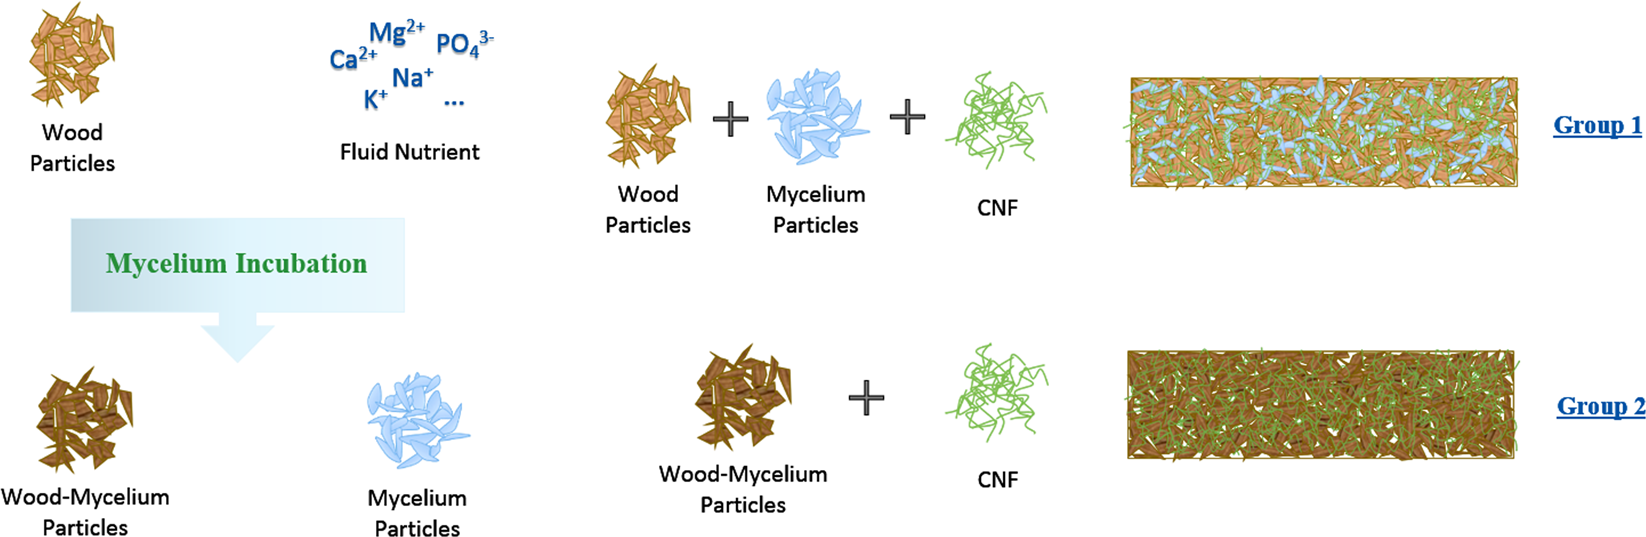 Fungal Mycelium Bio-Composite Acts as a CO2-Sink Building Material with Low  Embodied Energy